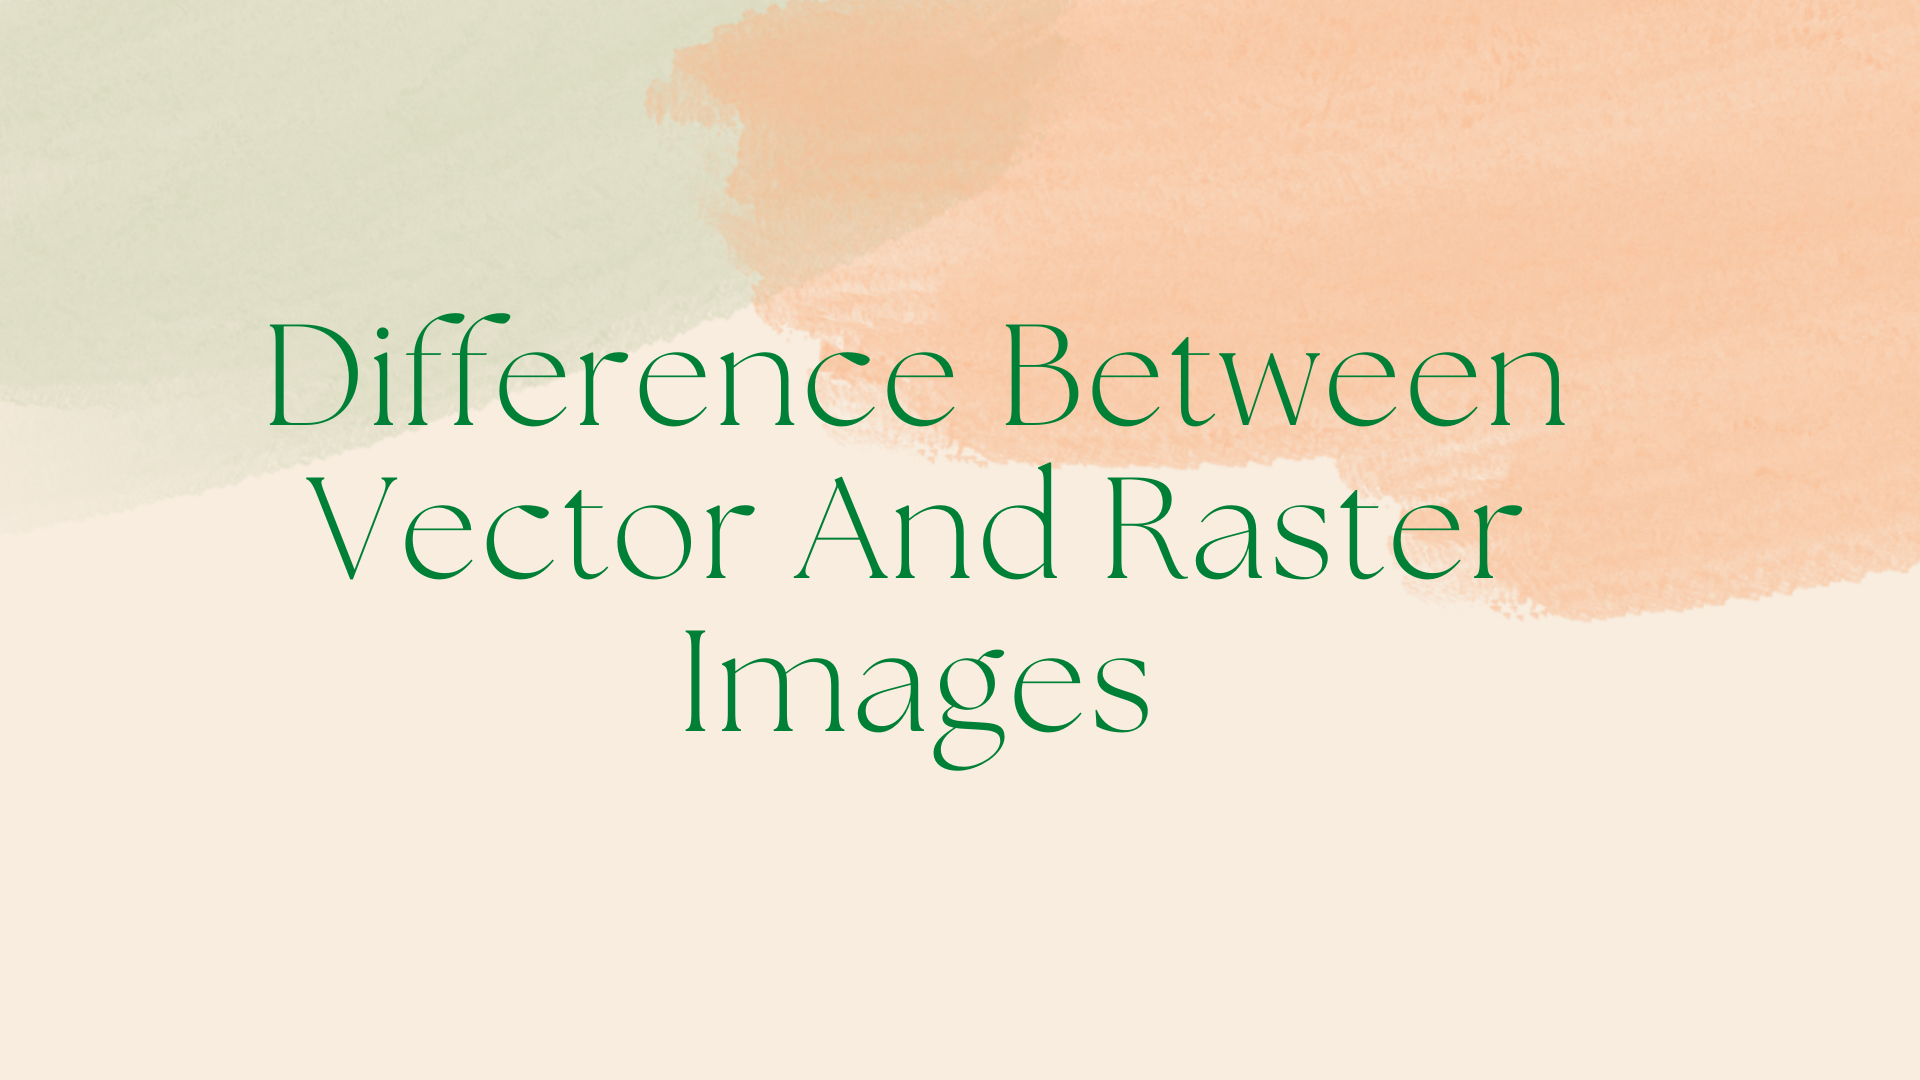 Difference Between Vector And Raster Images